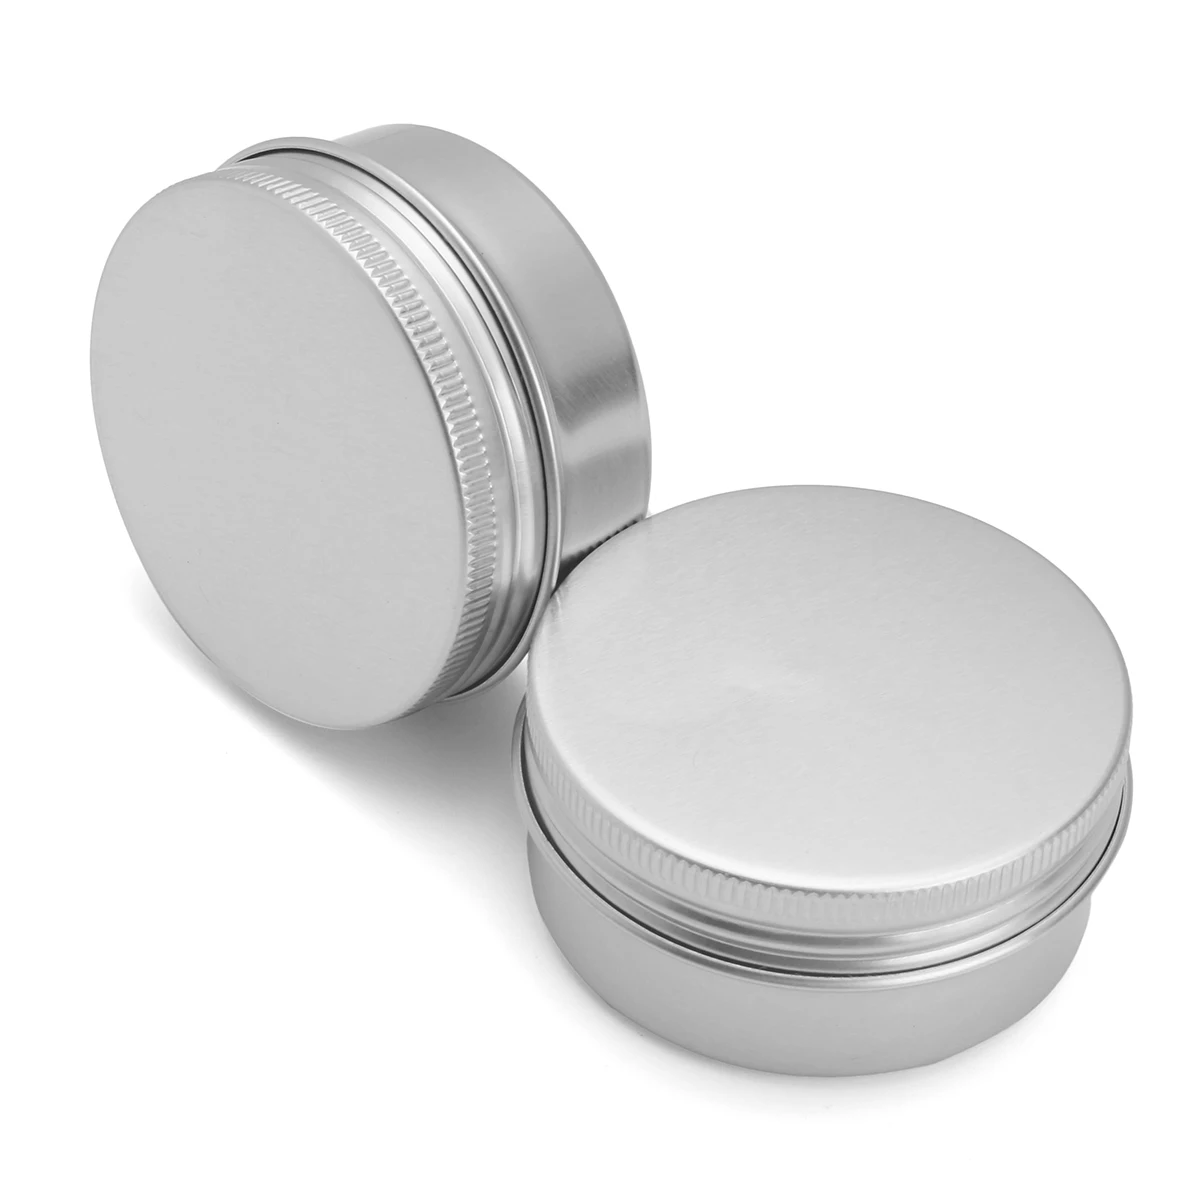 

10pcs 5g 10g 15g Aluminum Tins Cans Round Storage Jars Containers Screw Lids Tins Travel Cosmetic Refillable Containers Pot